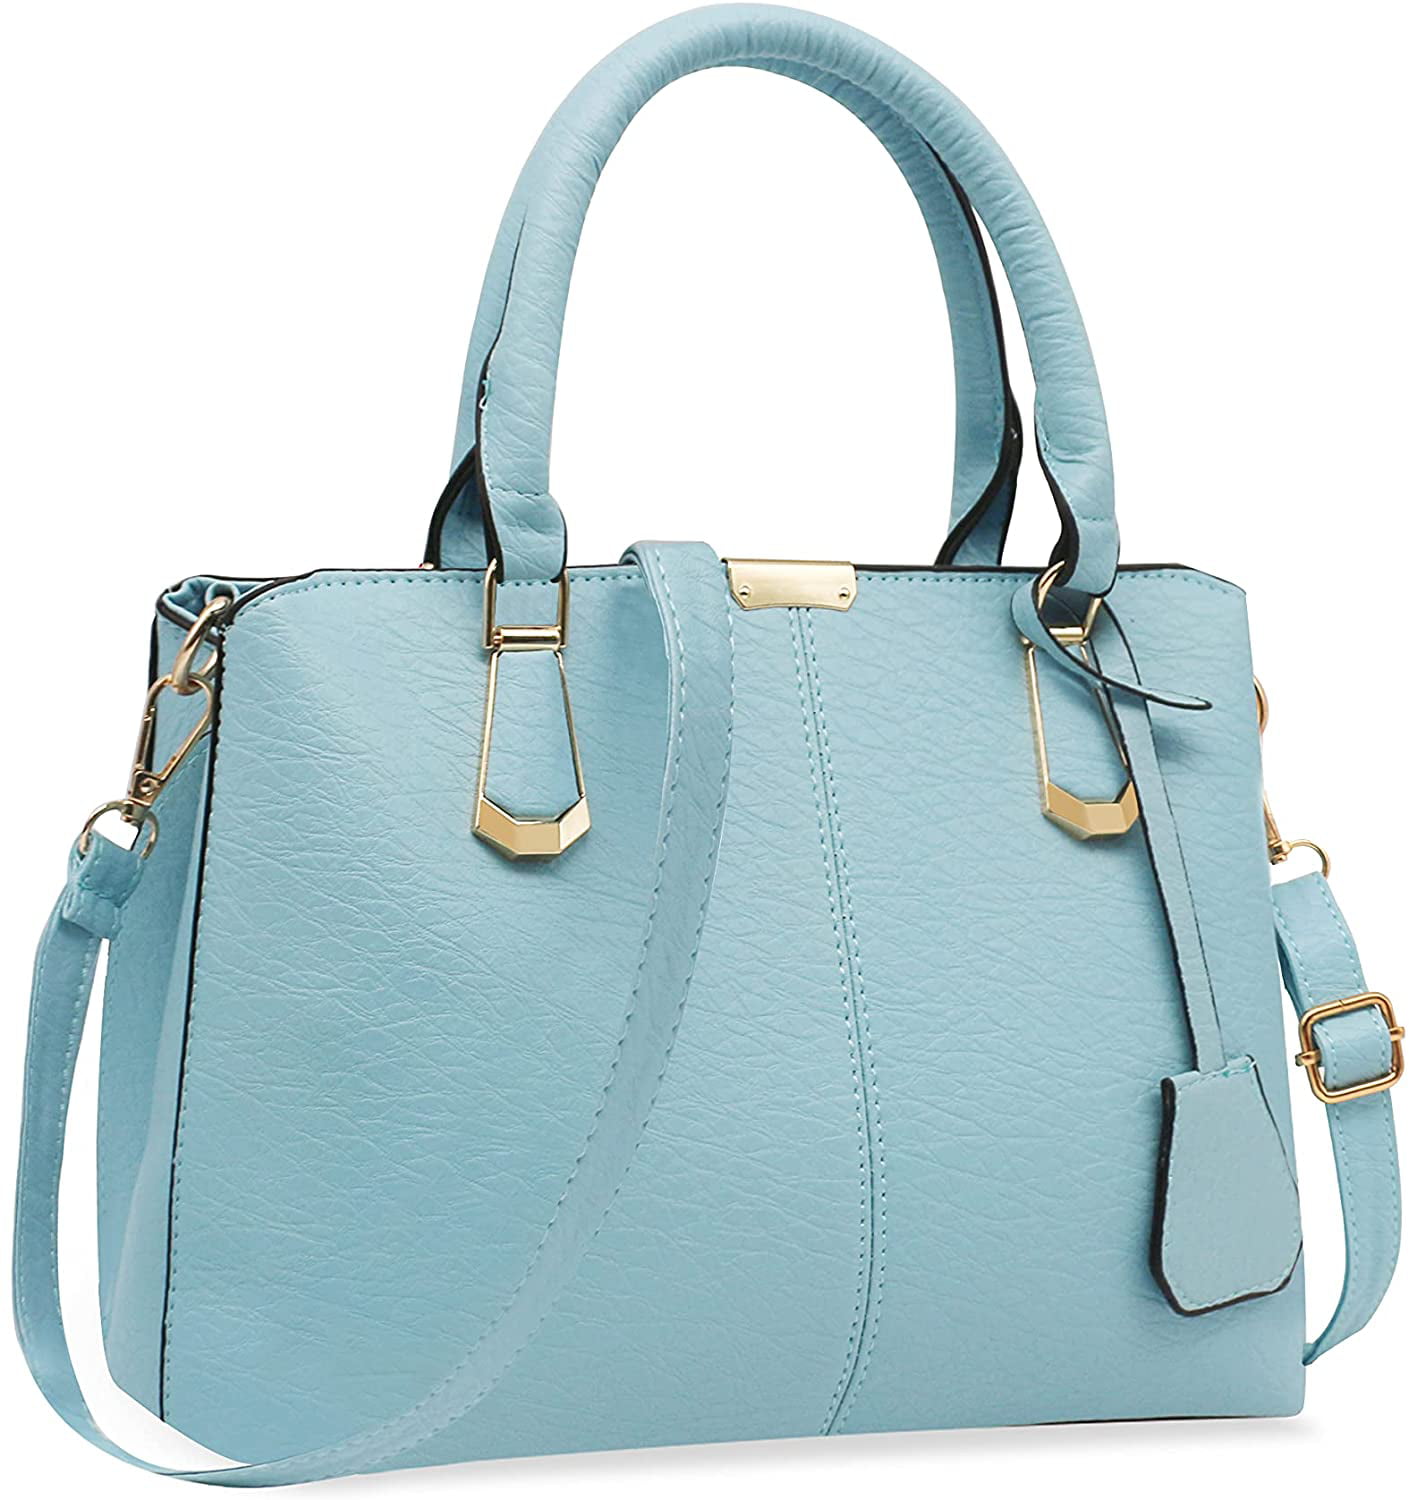 Purses and Handbags for Women Fashion Ladies PU Leather Top Handle Satchel Shoulder Tote Bags 